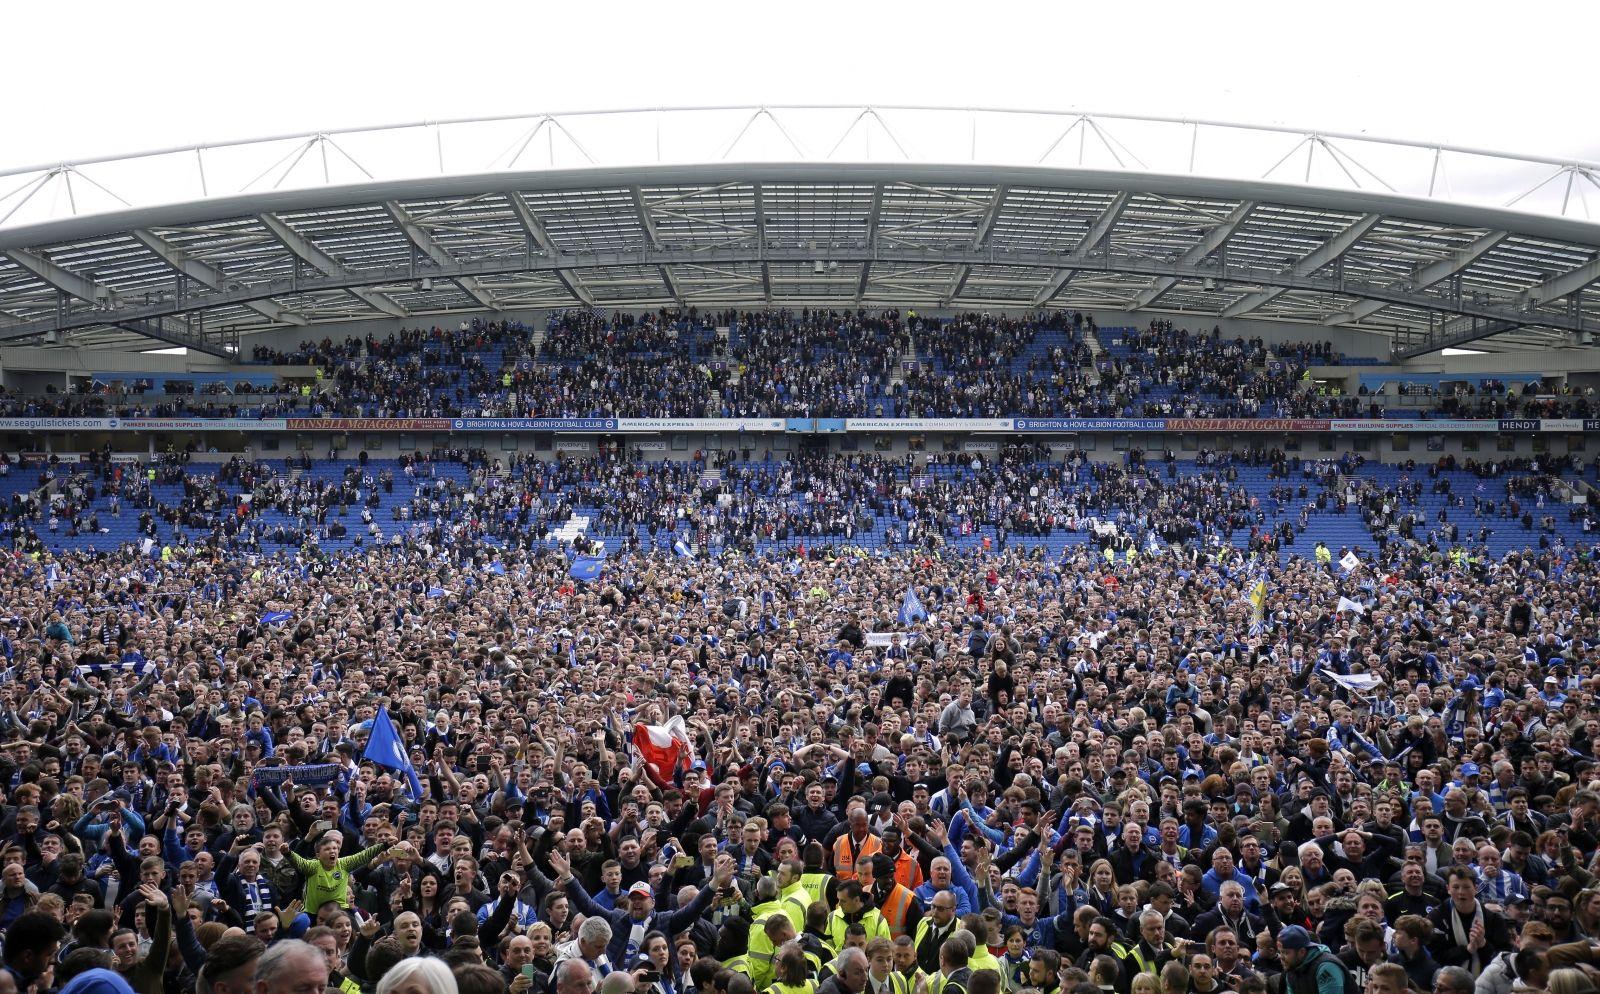 Brighton and Hove Albion promoted to the Premier League